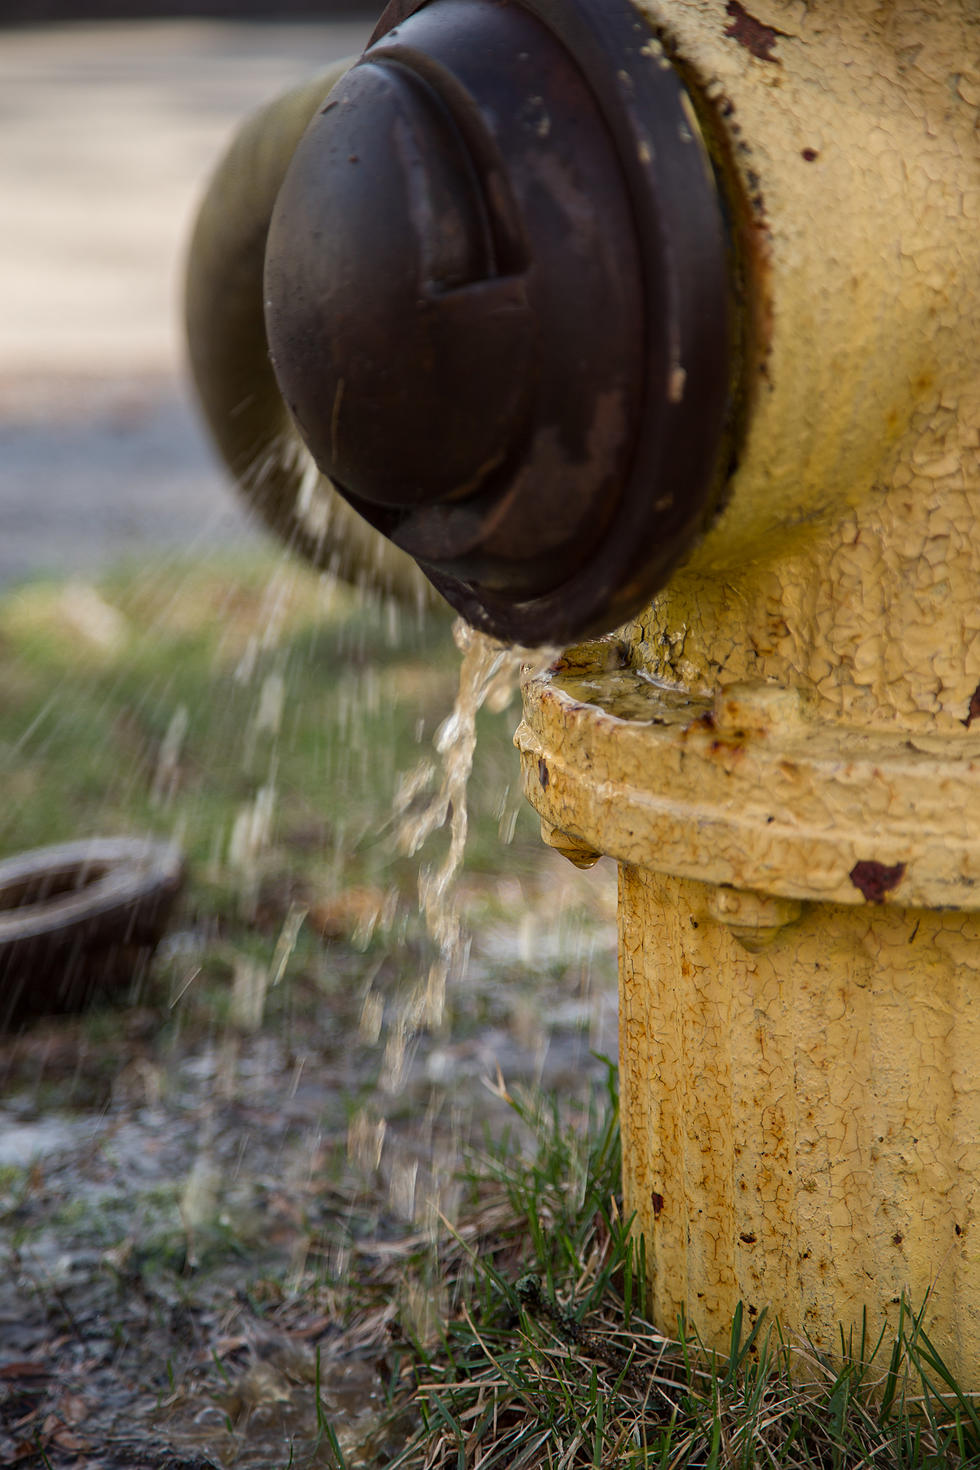 Flushing of the City of Pittsfield’s Water System to Begin Monday, May 4